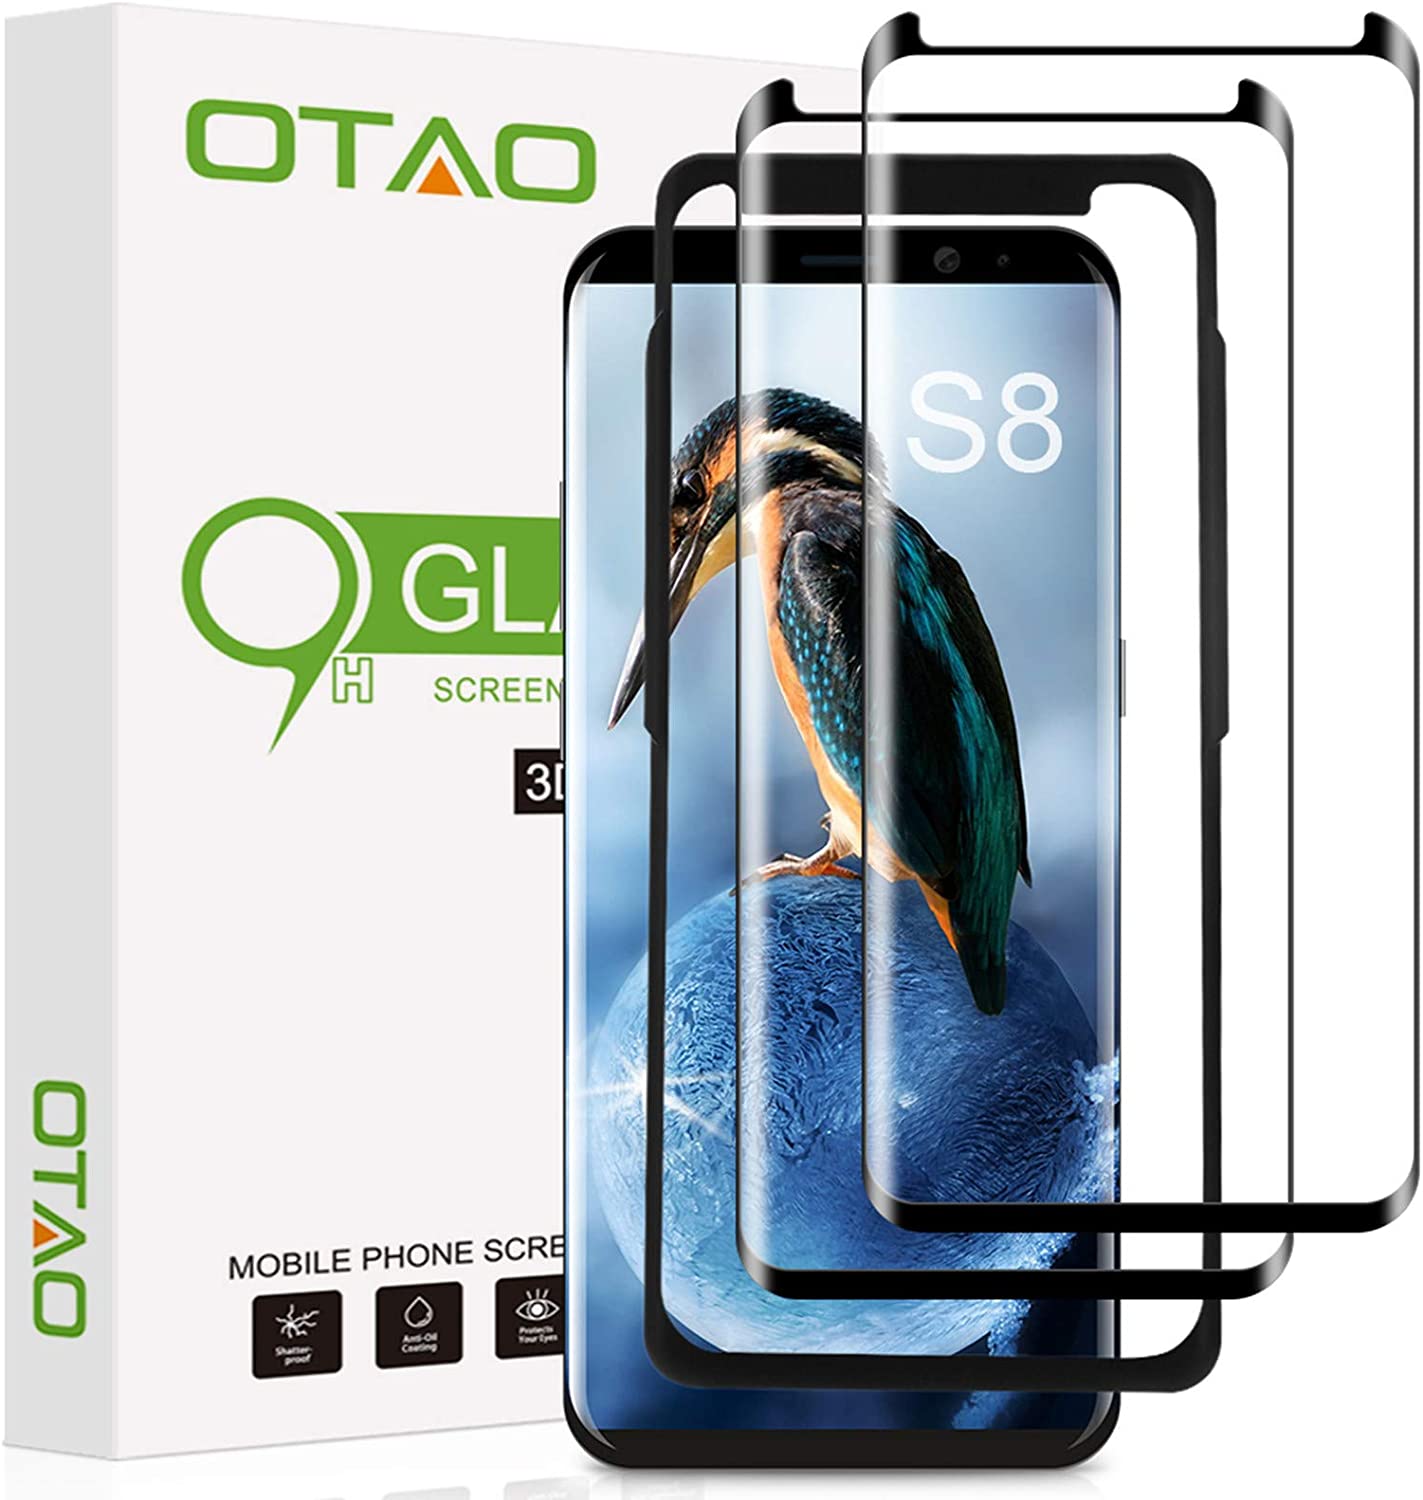 OTAO Galaxy S8 Touch Sensitive Android Screen Protectors, 2-Pack